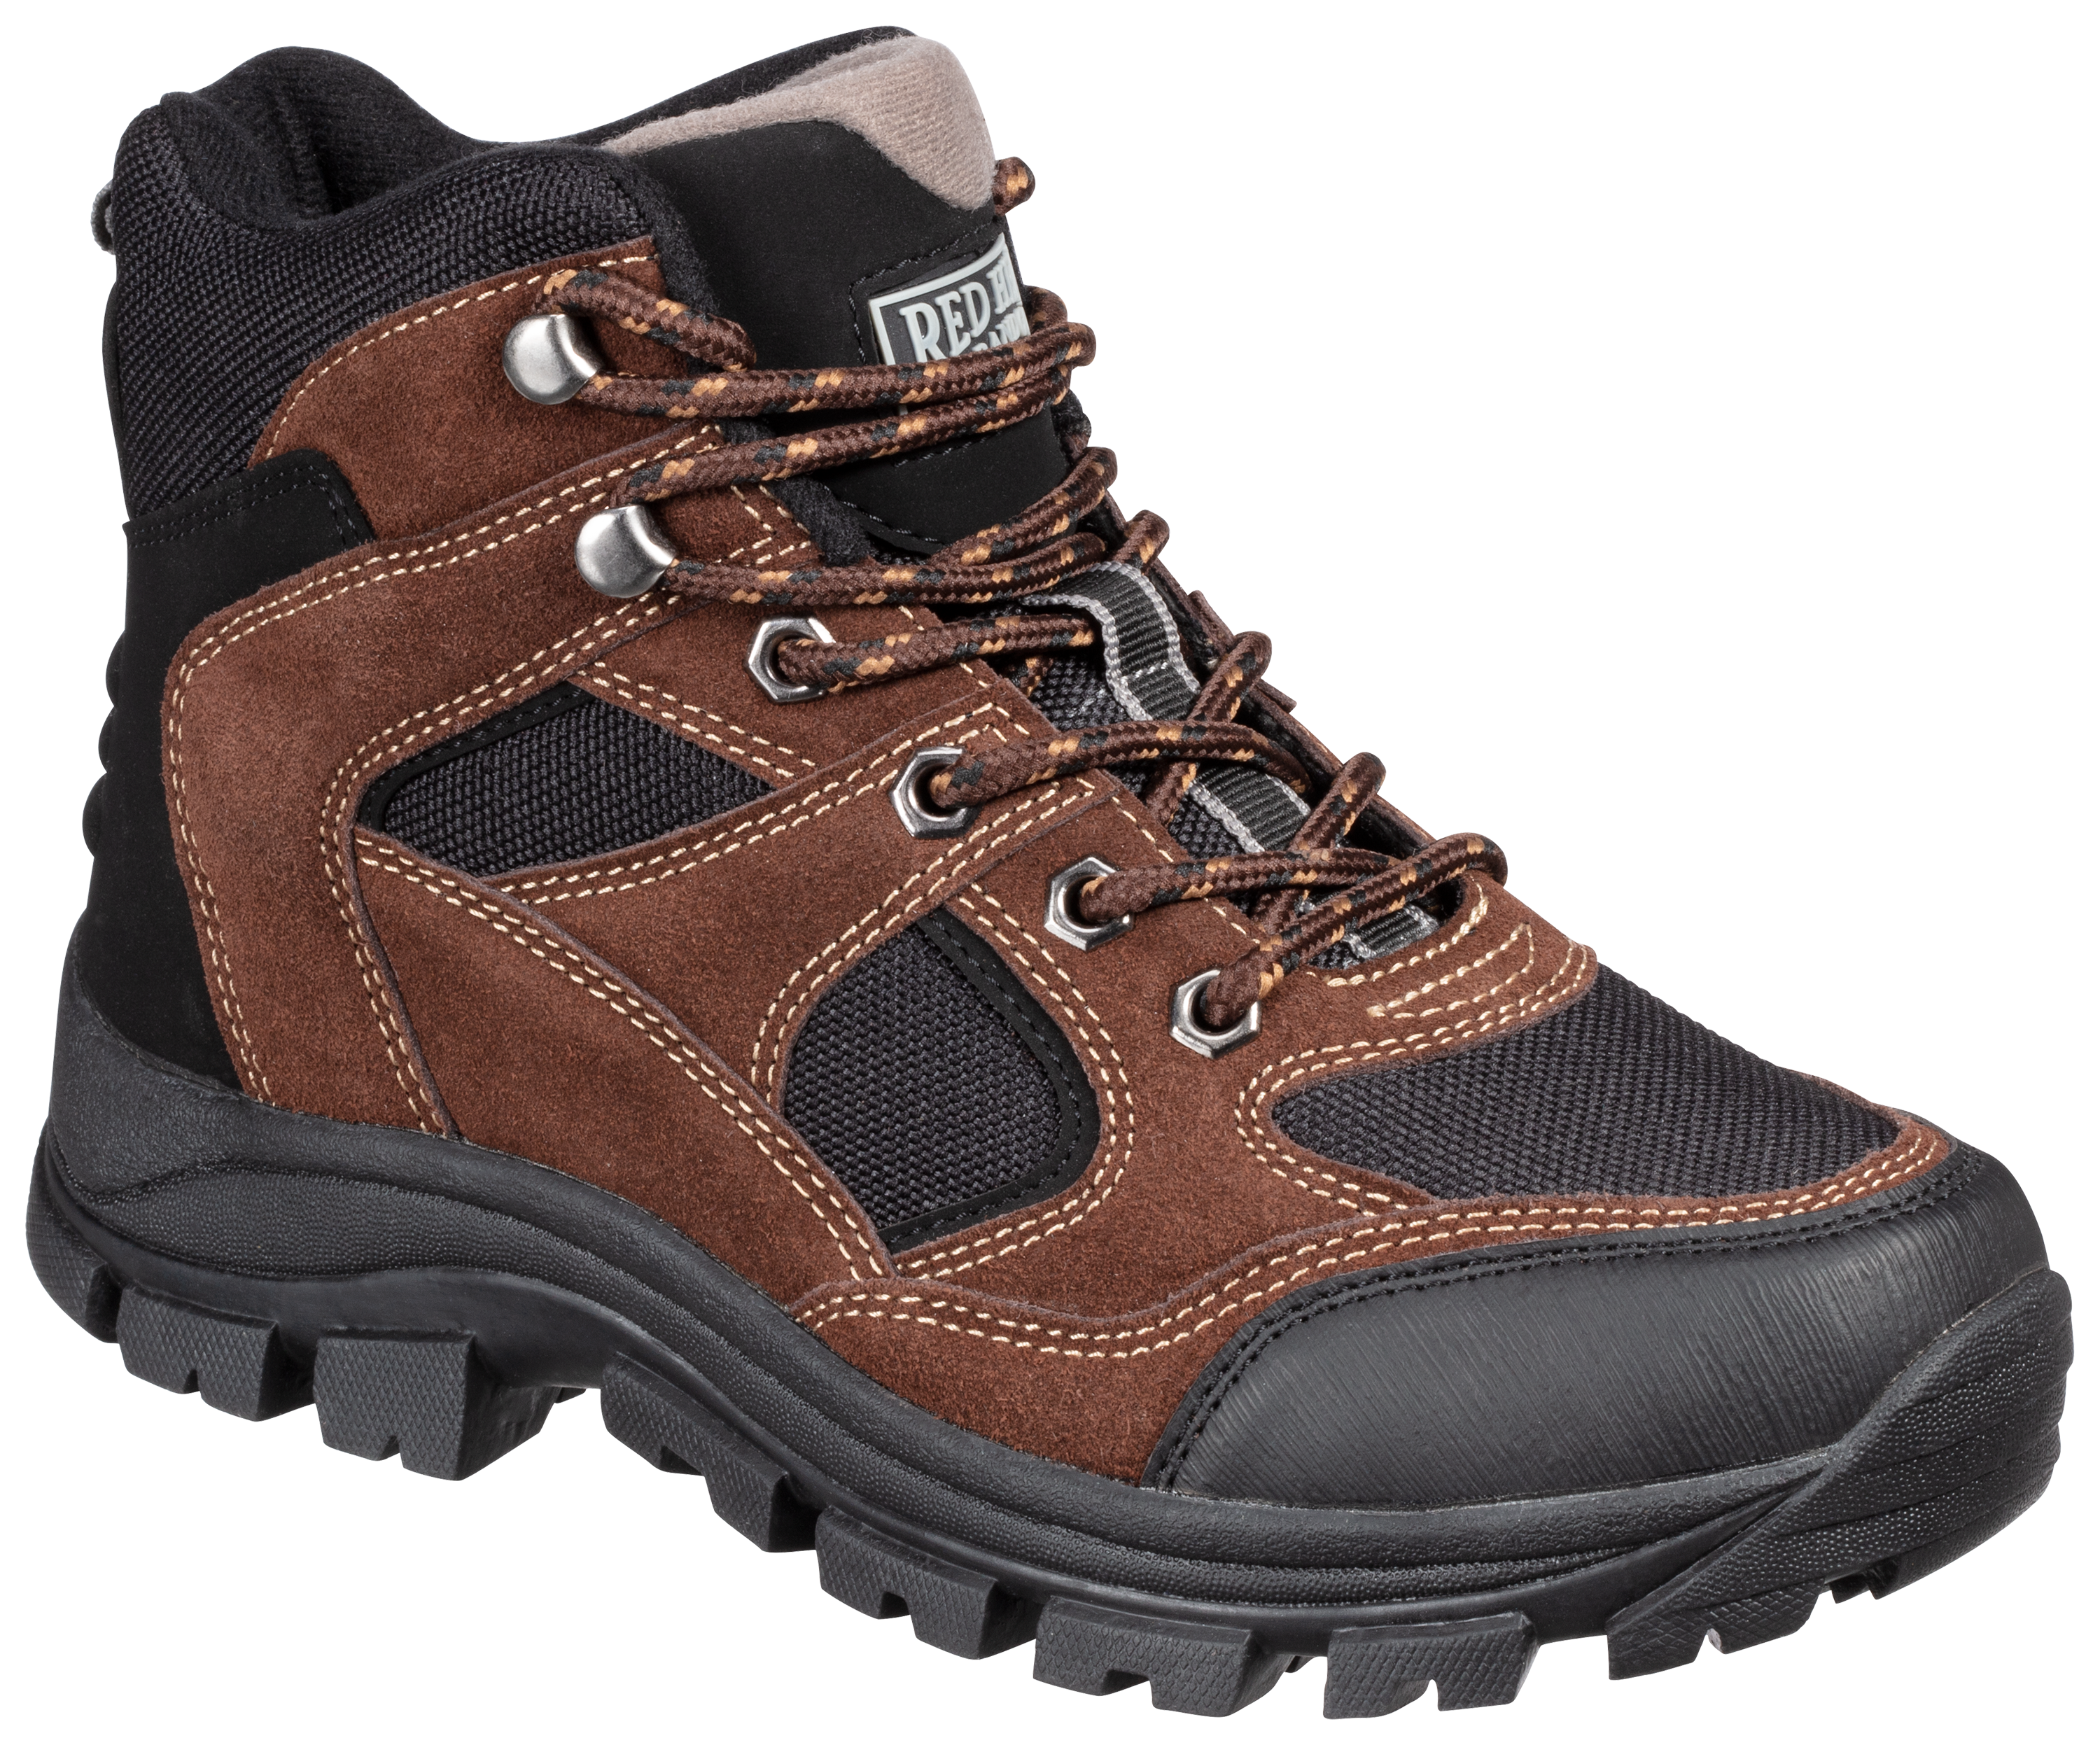 RedHead Everest III Hiking Boots for Ladies - Brown - 11M